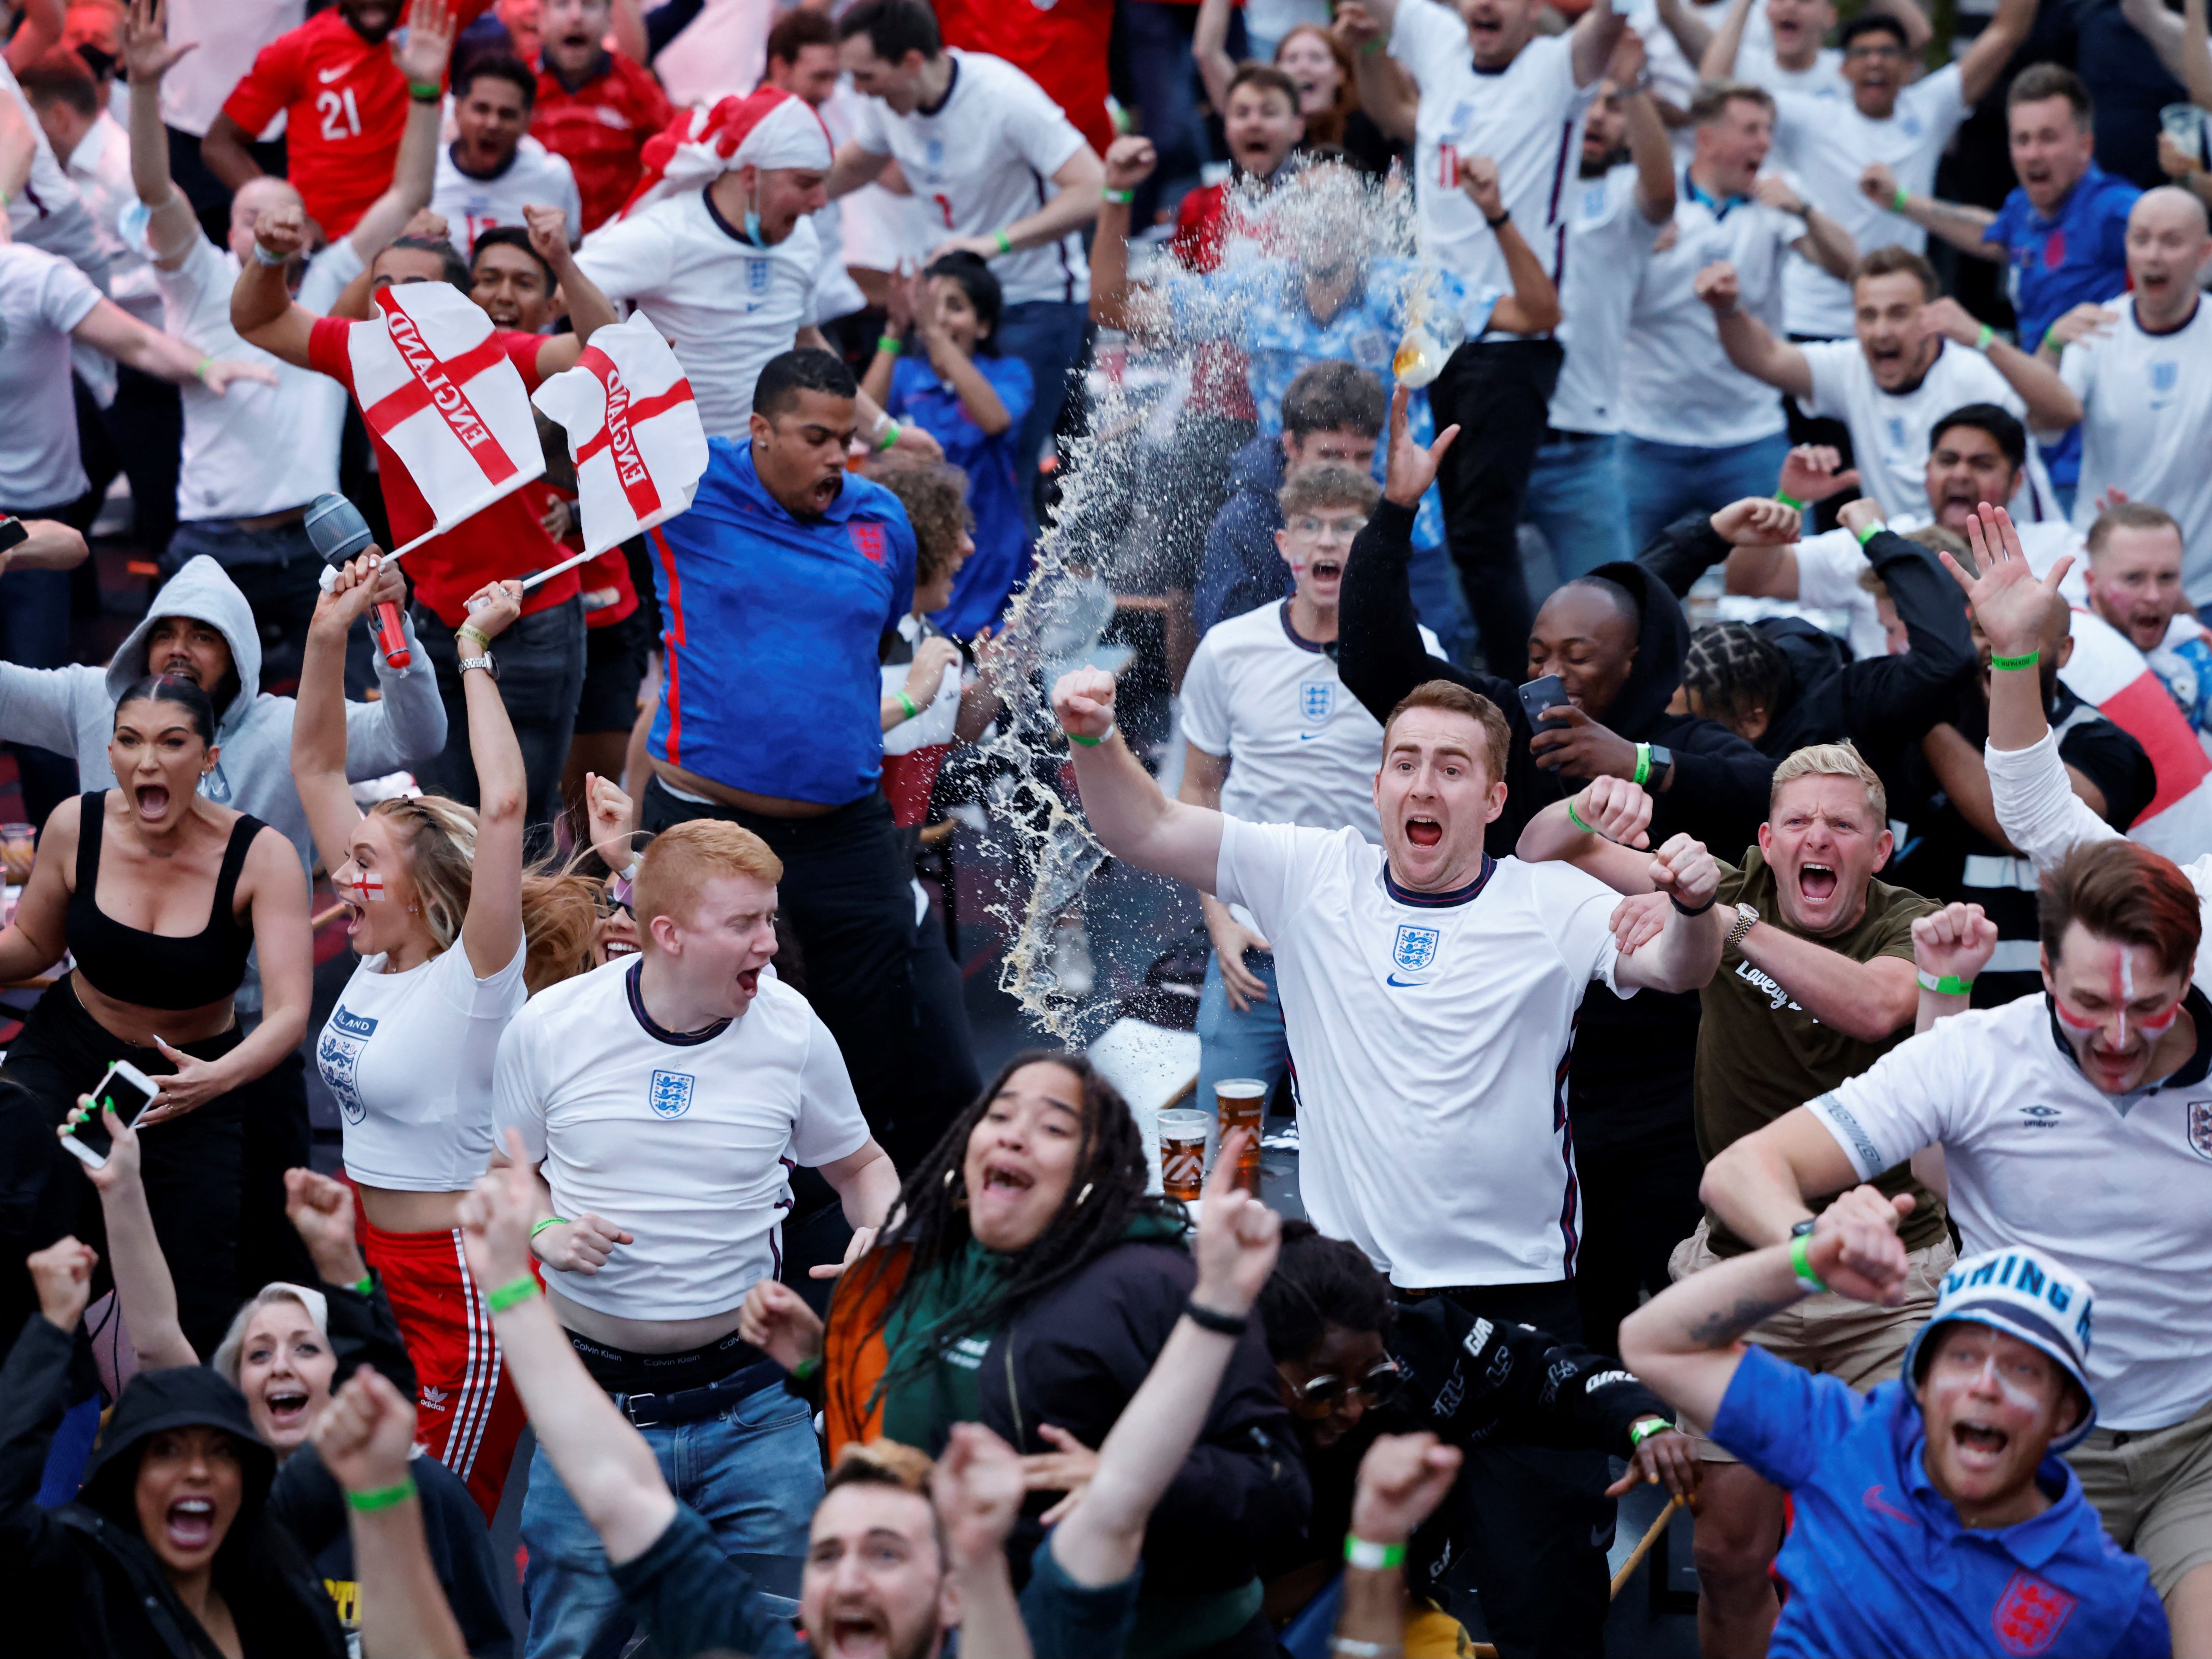 Supporters react to England’s first goal of the night